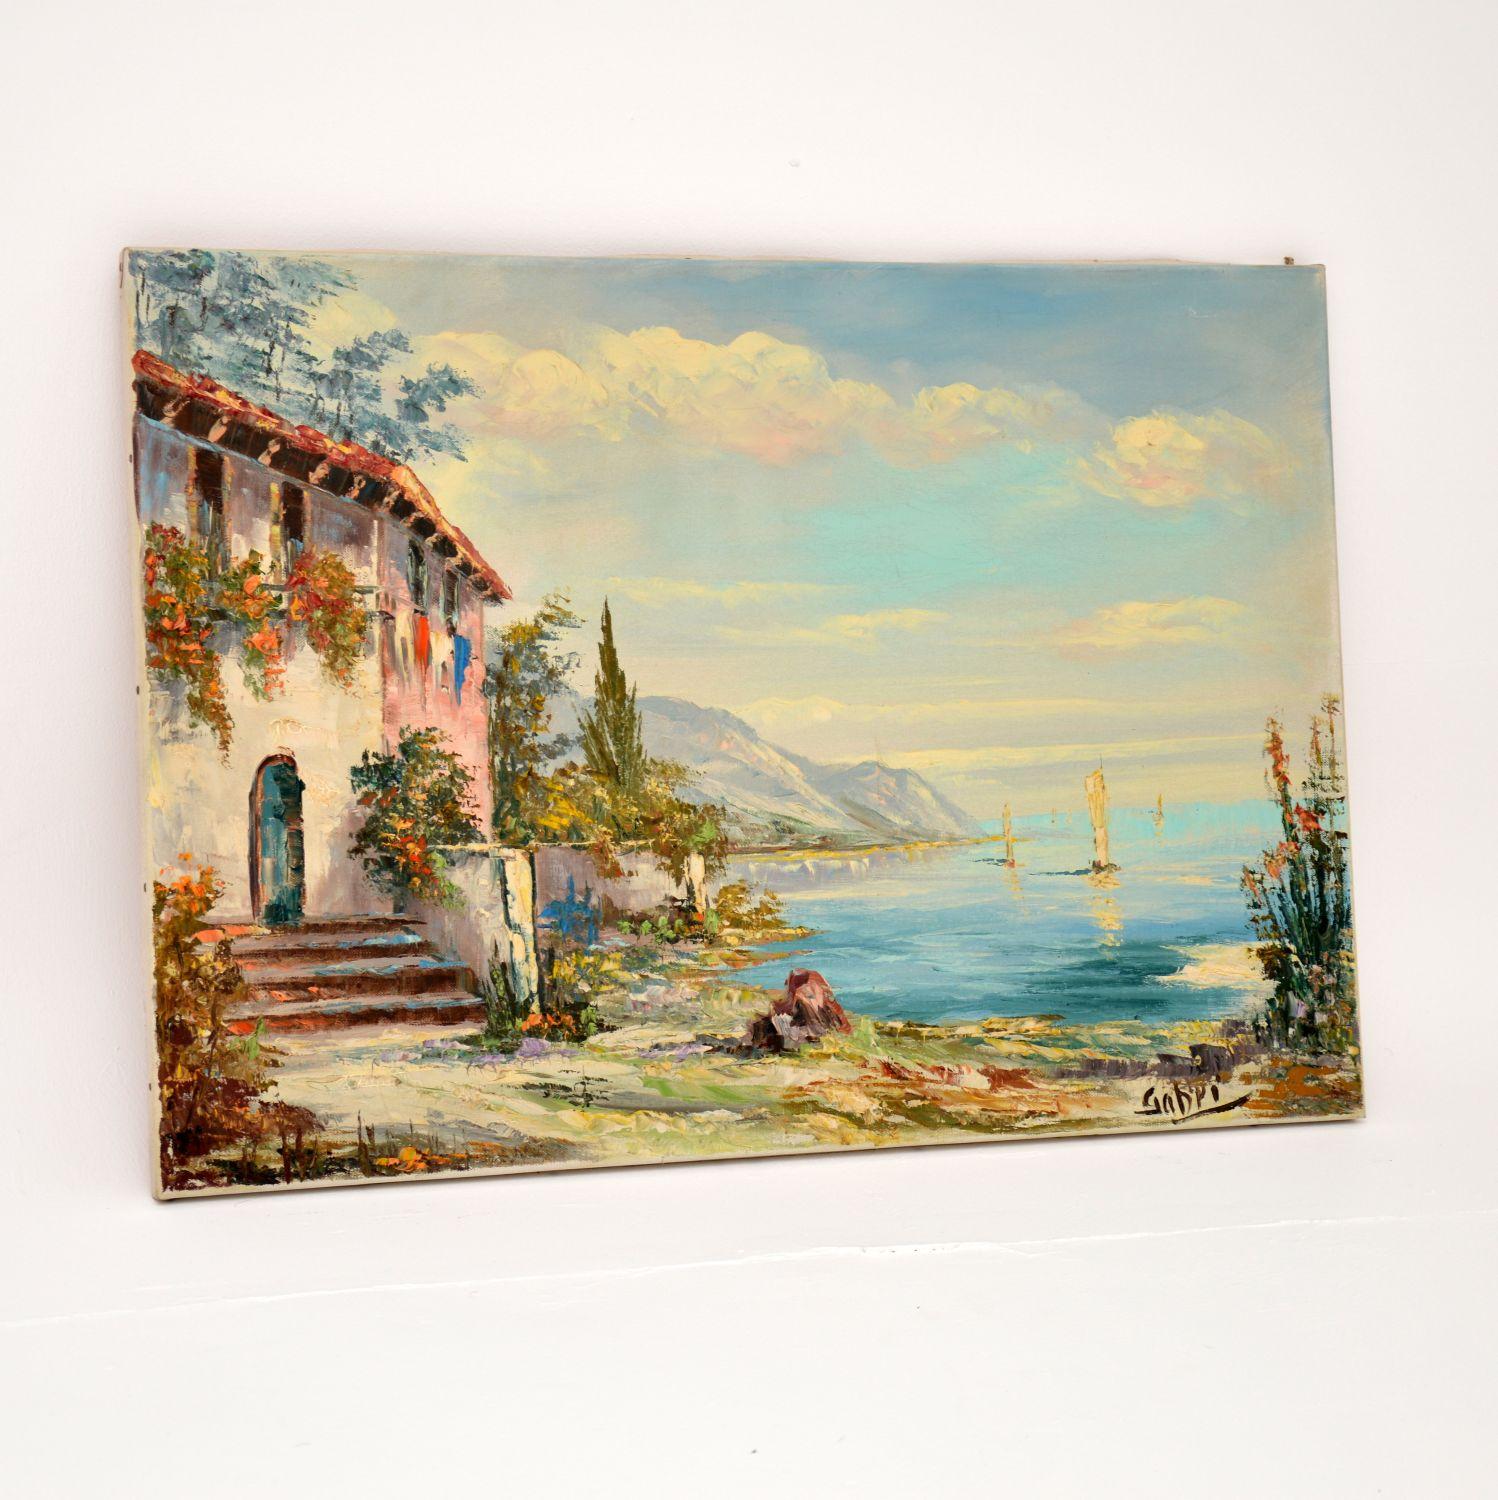 A stunning original vintage landscape oil painting on canvass. This is signed by the artist “Gabri”, it dates from around the 1960’s.

It is beautifully executed and depicts an absolutely gorgeous coastal scene. Very much in the impressionist